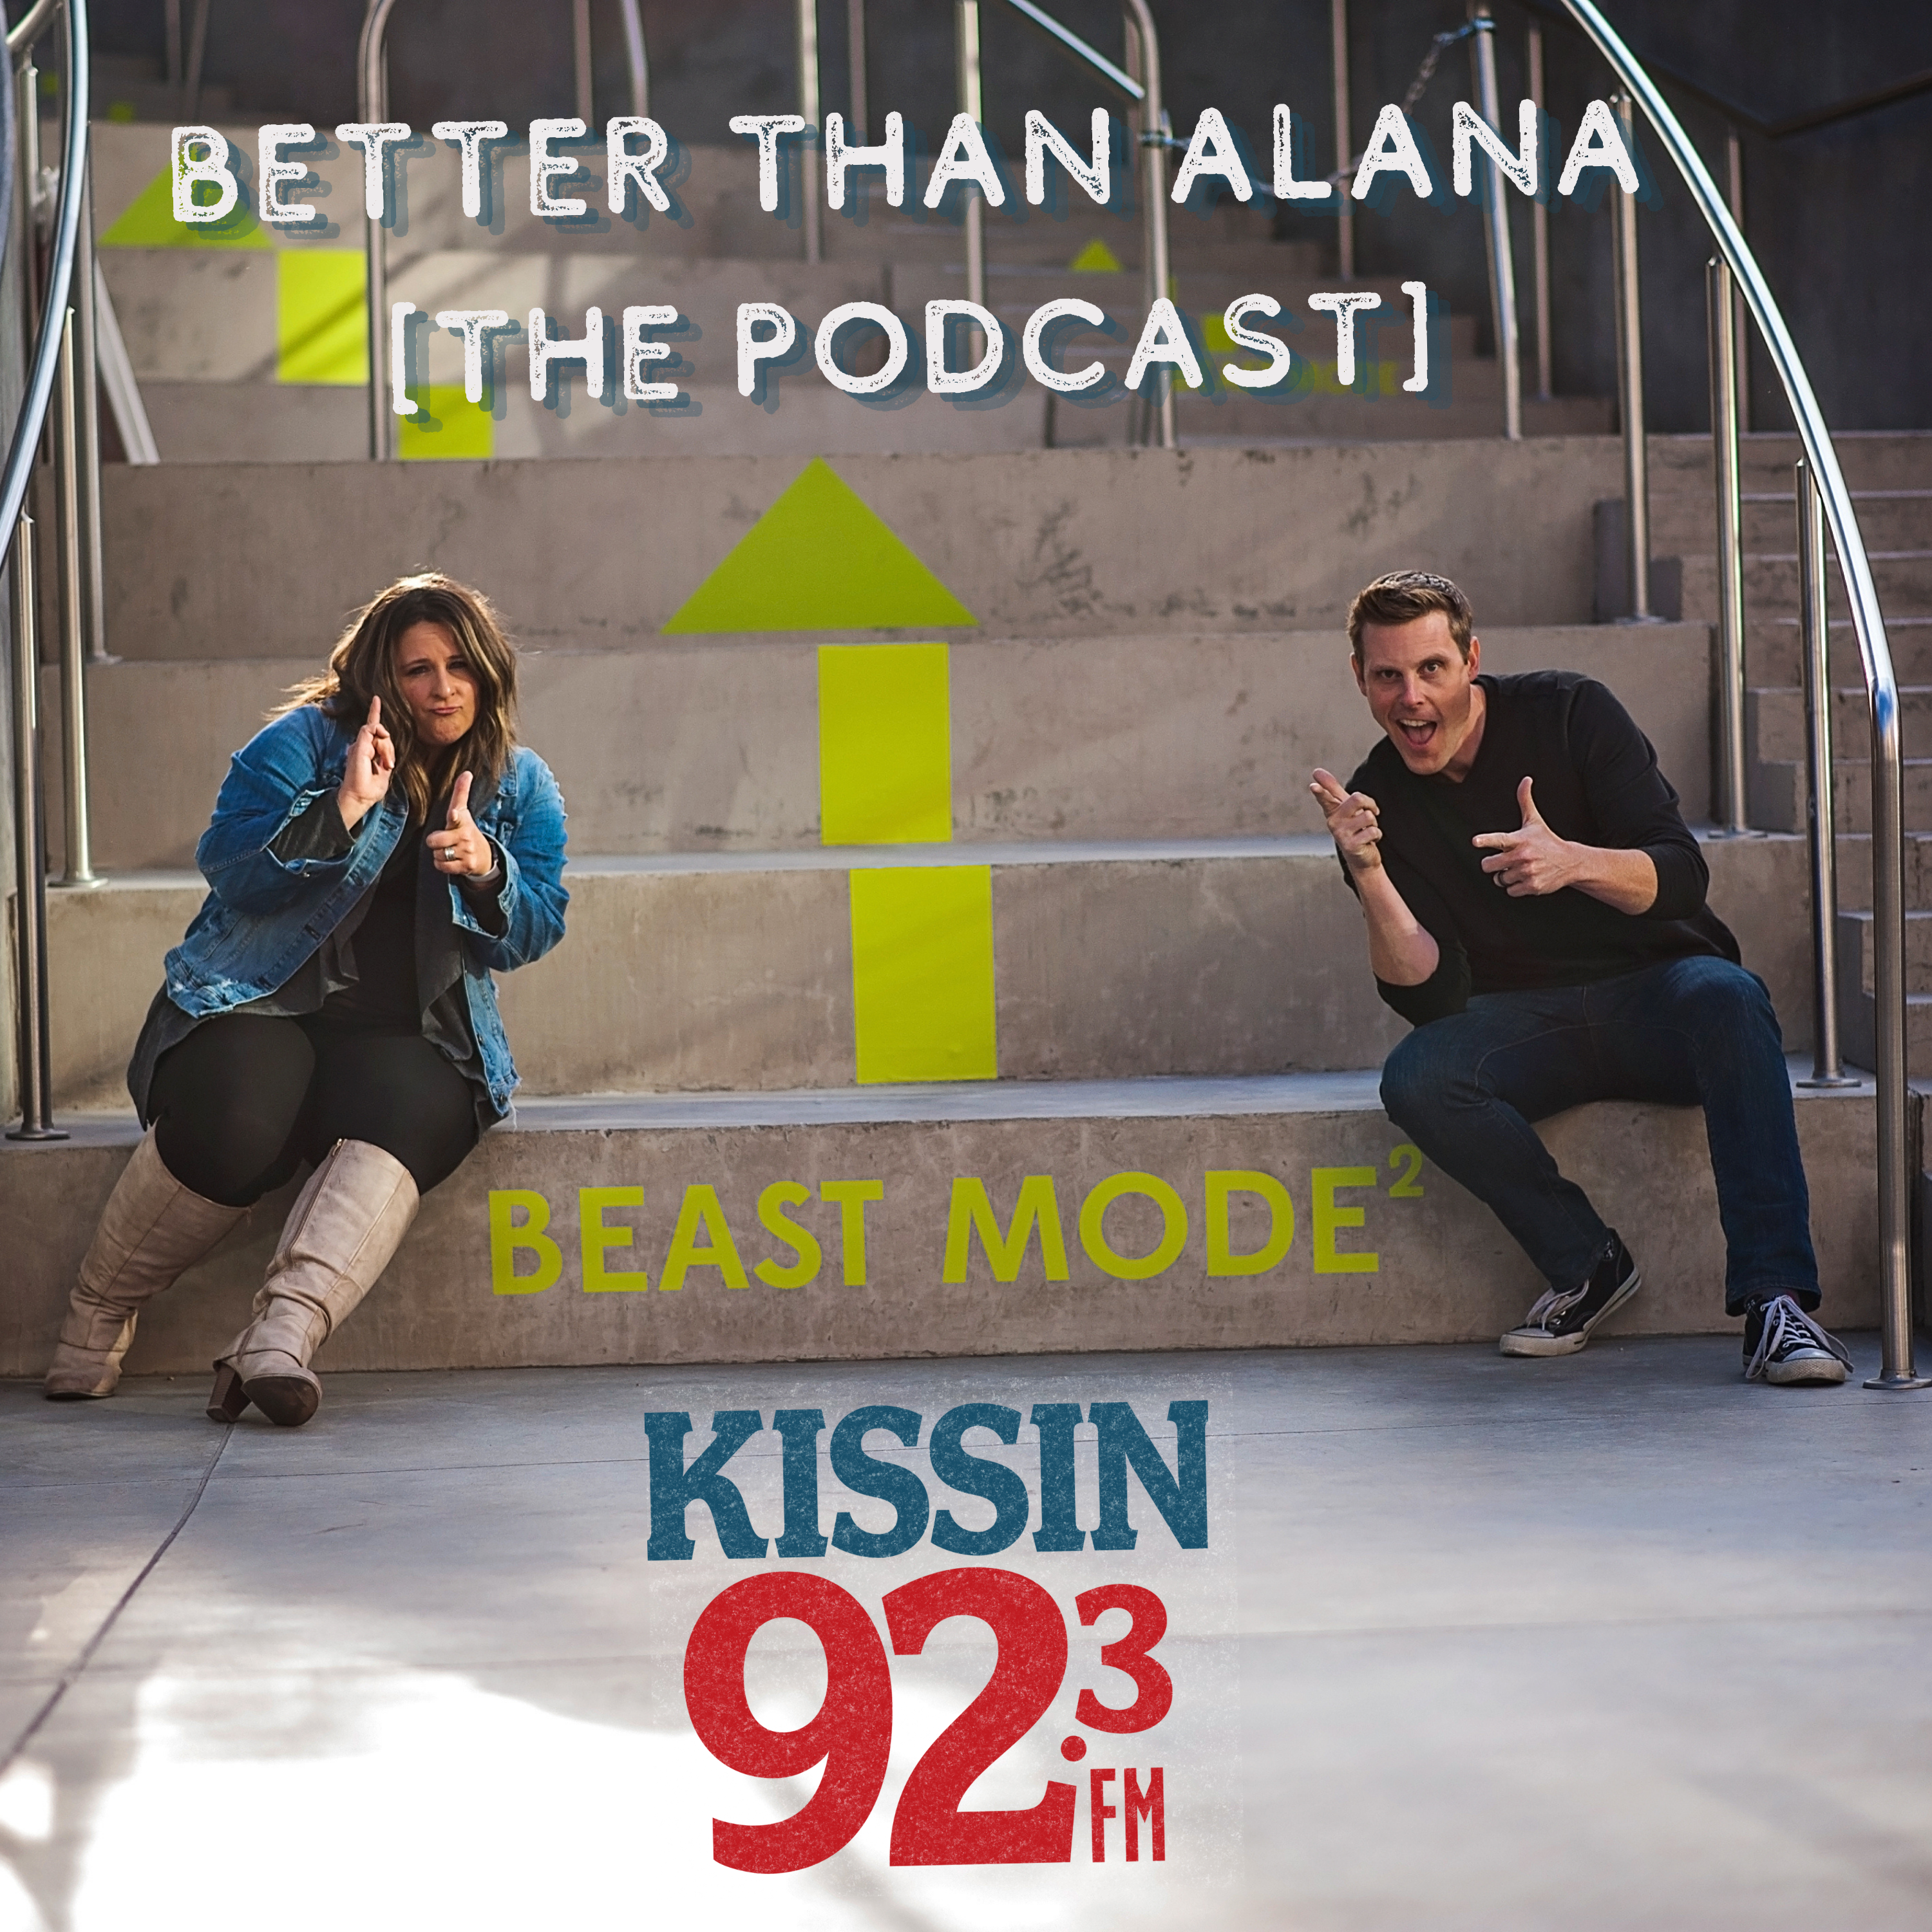 Better Than Alana: The Podcast